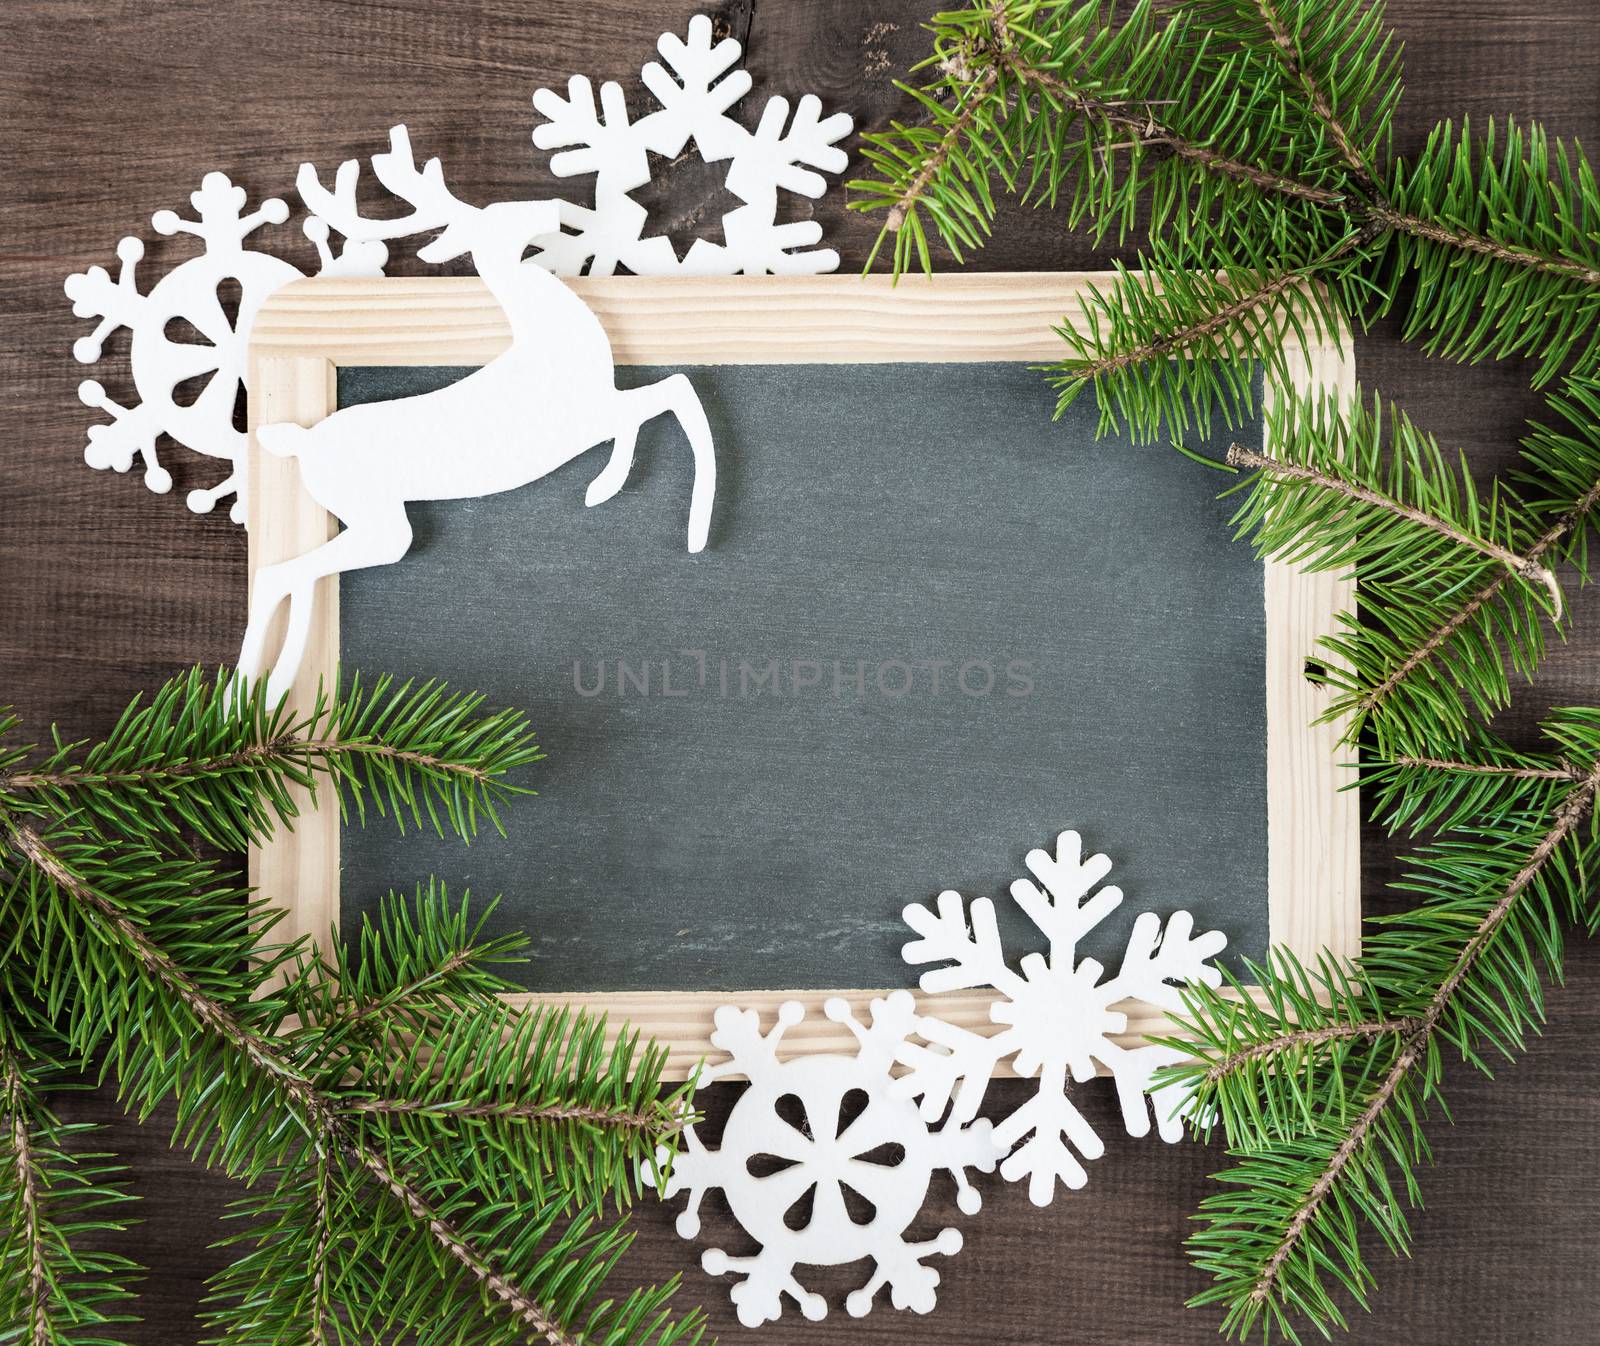 Christmas background: blank chalkboard surrounded by green fir branches and white felts snowflakes and deer